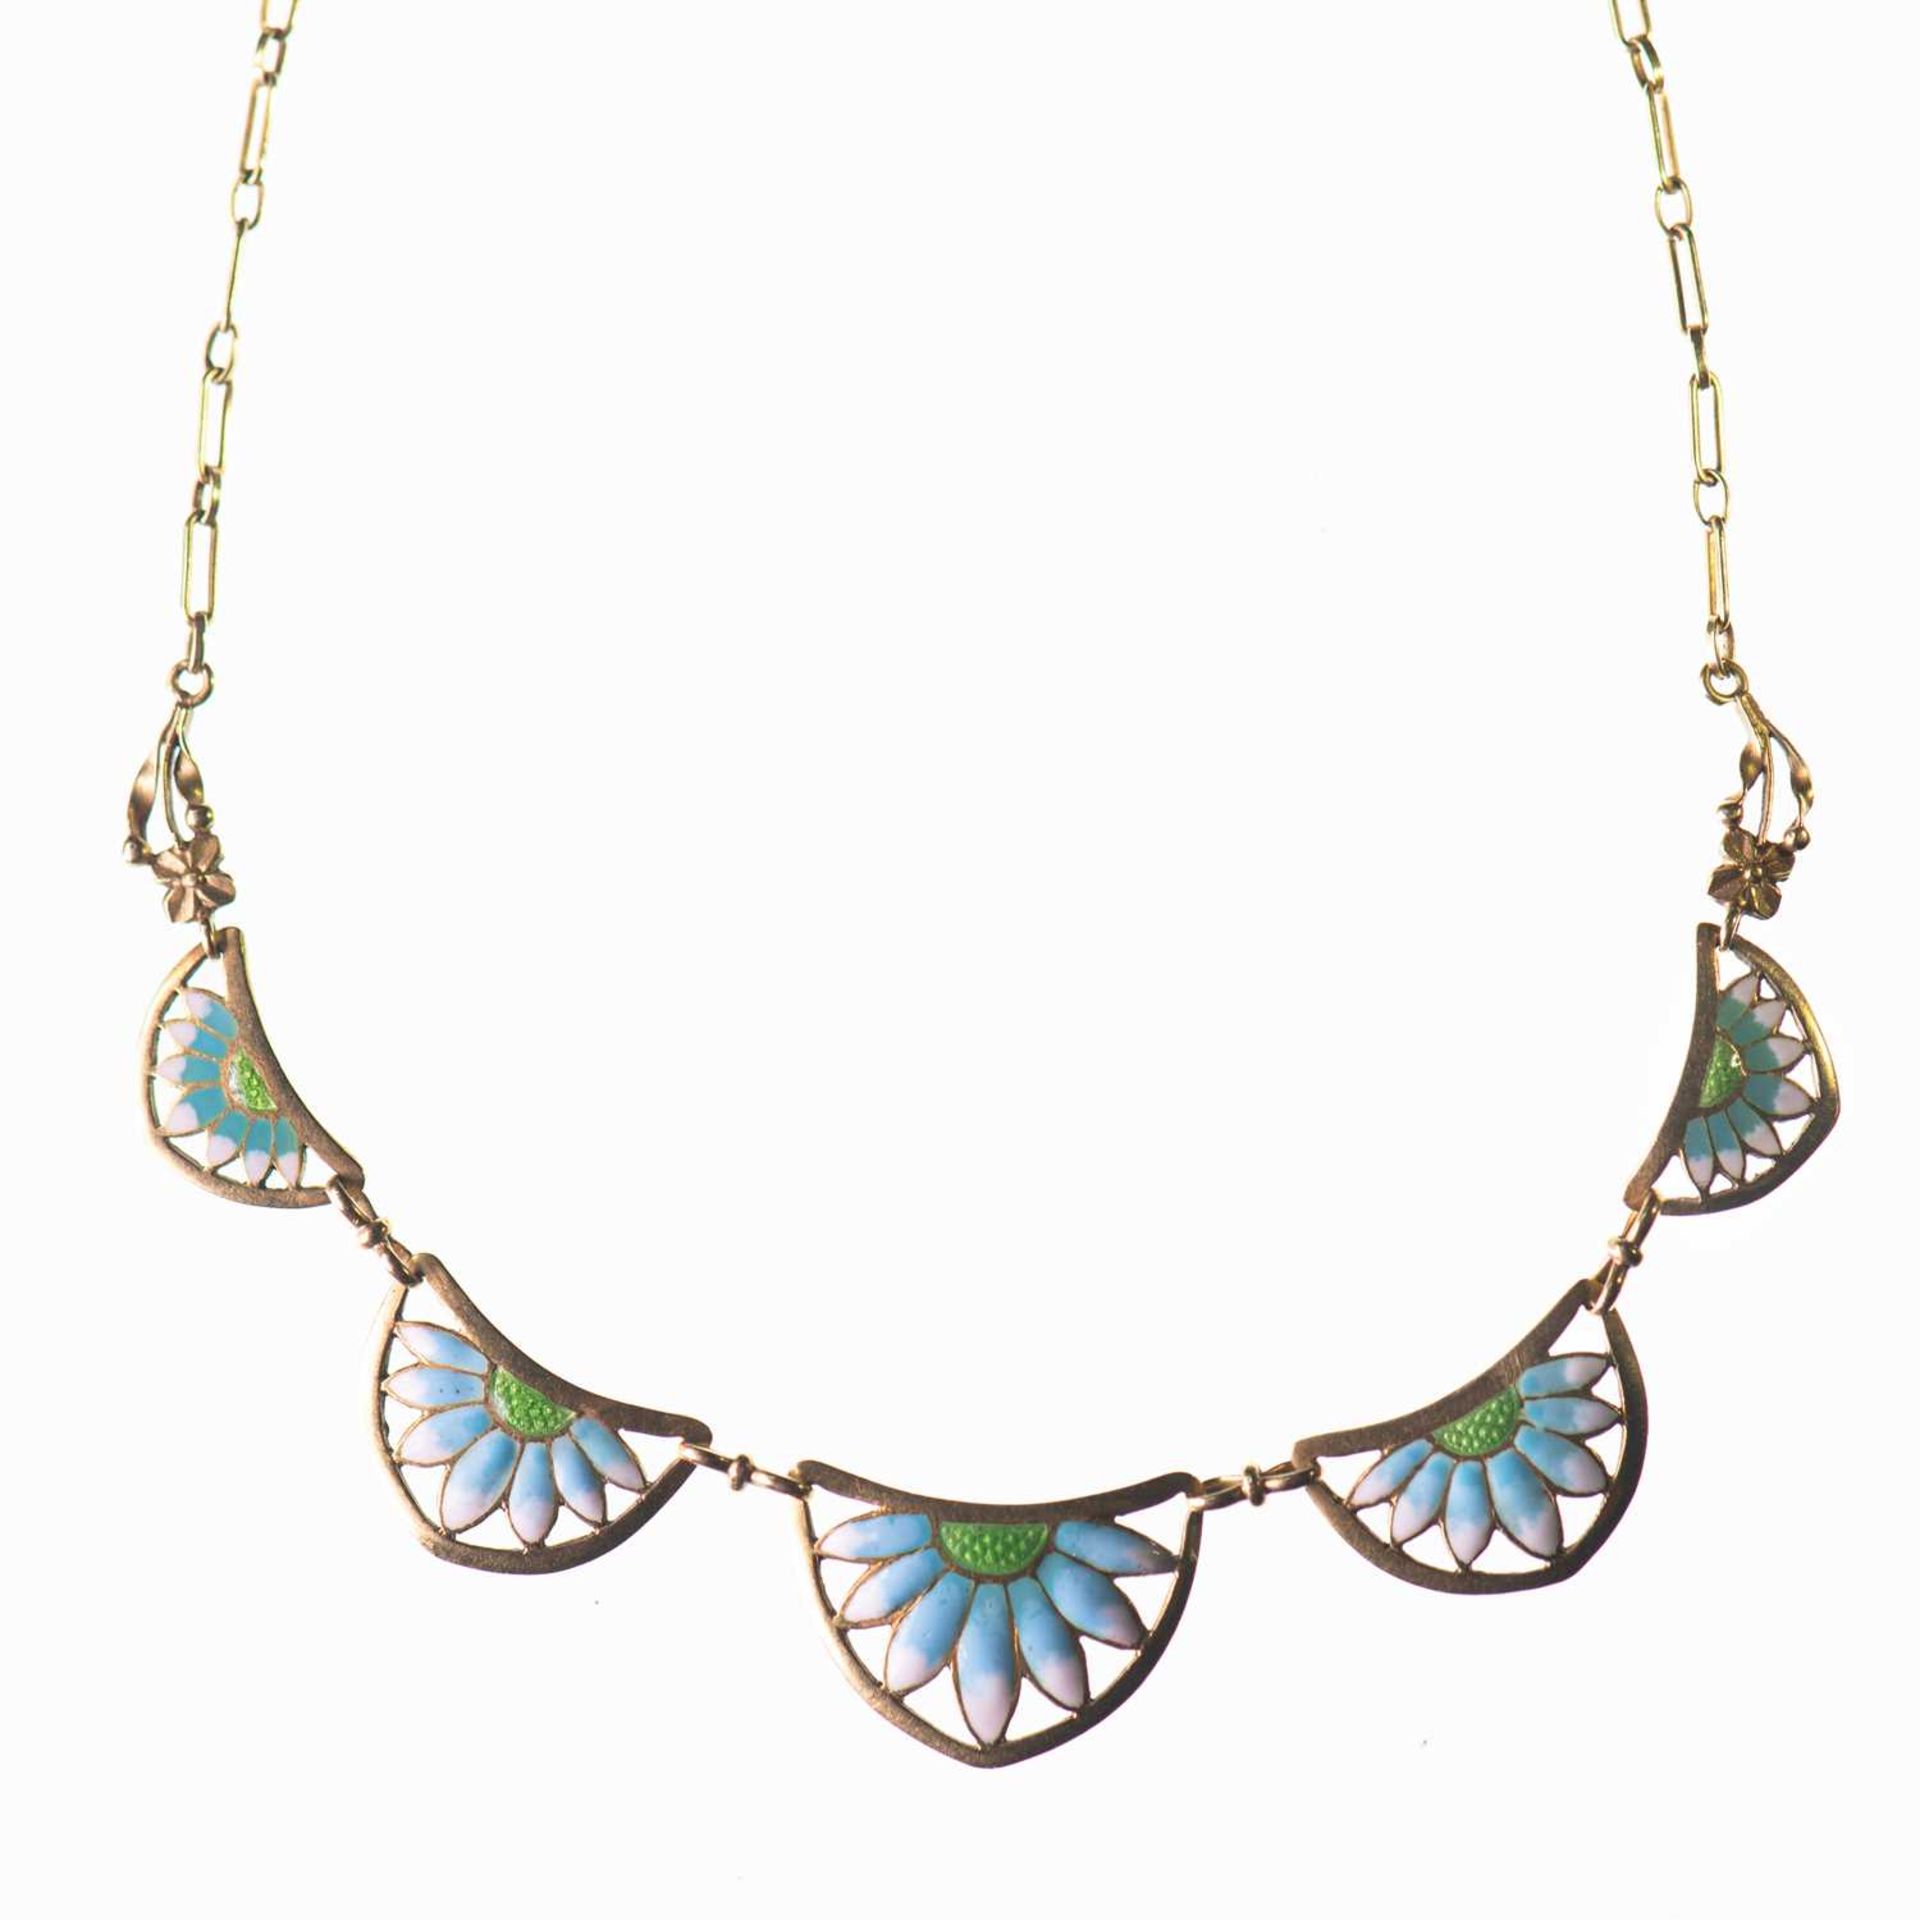 AN ENAMELLED NECKLACE